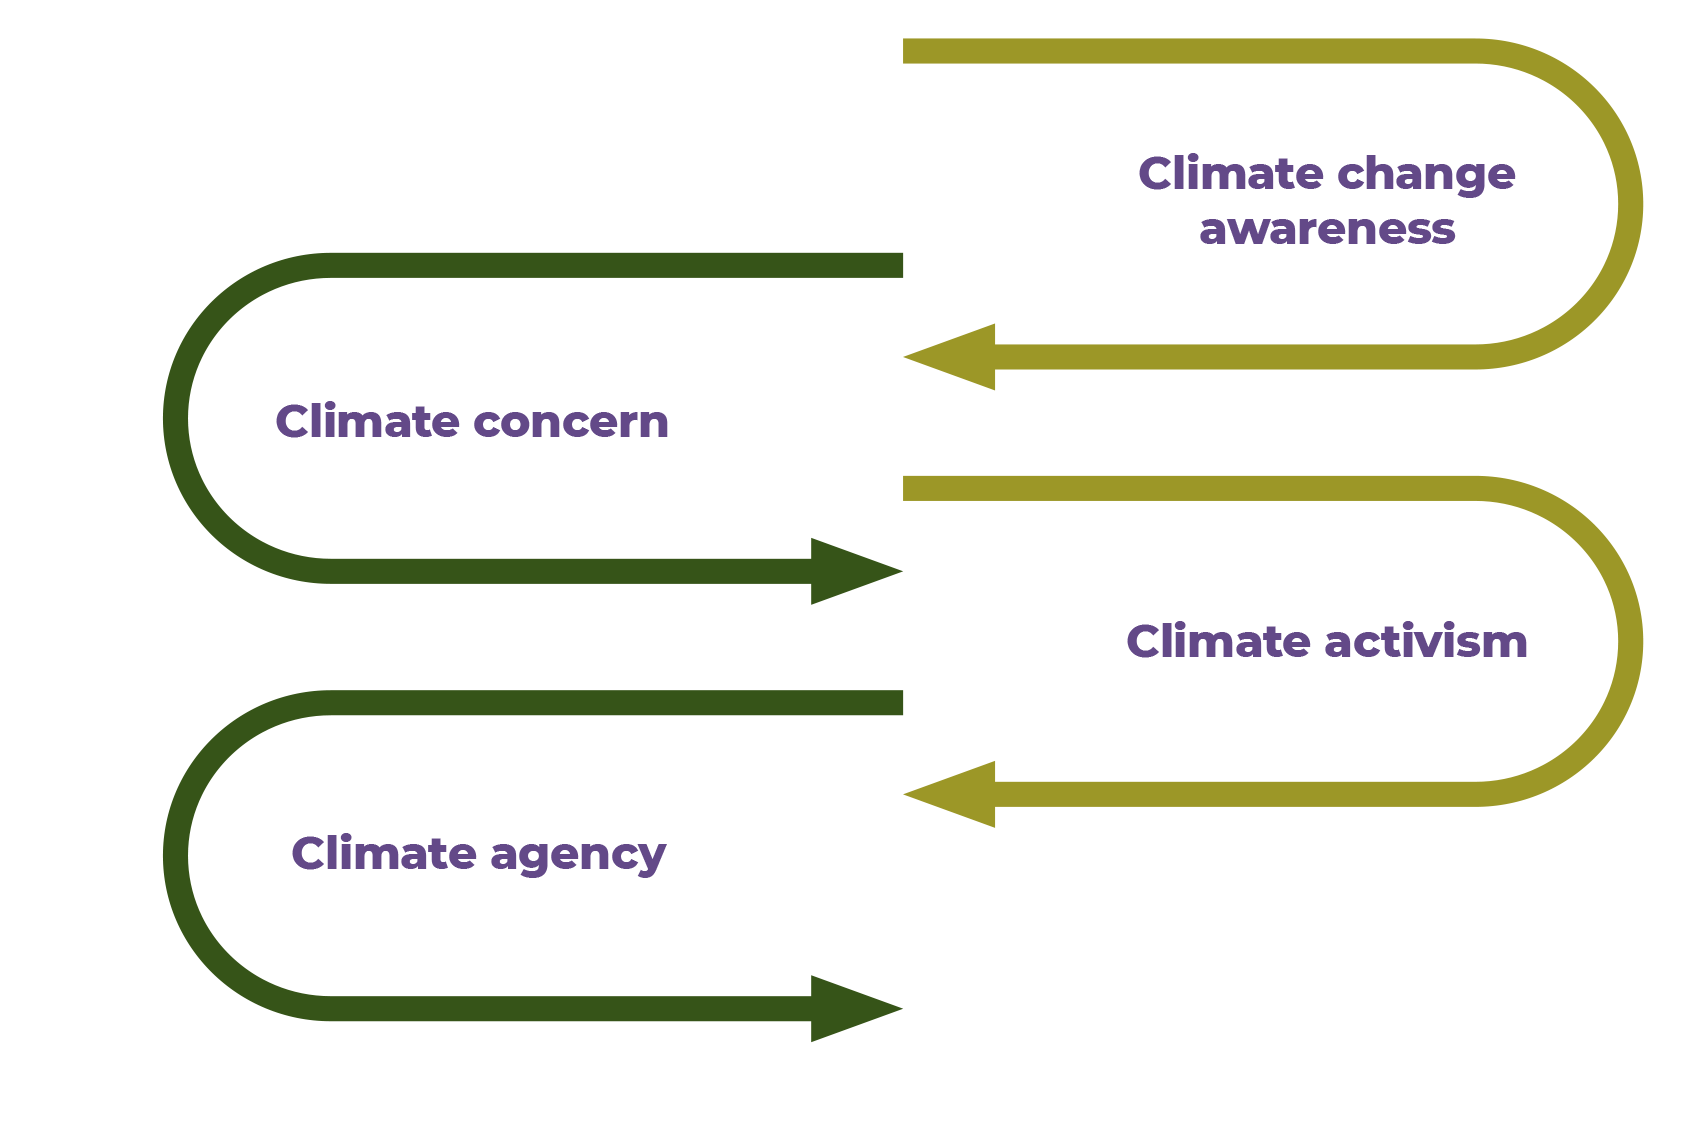 Figure 5.1.4 - An ideal model for moving from climate change awareness to action